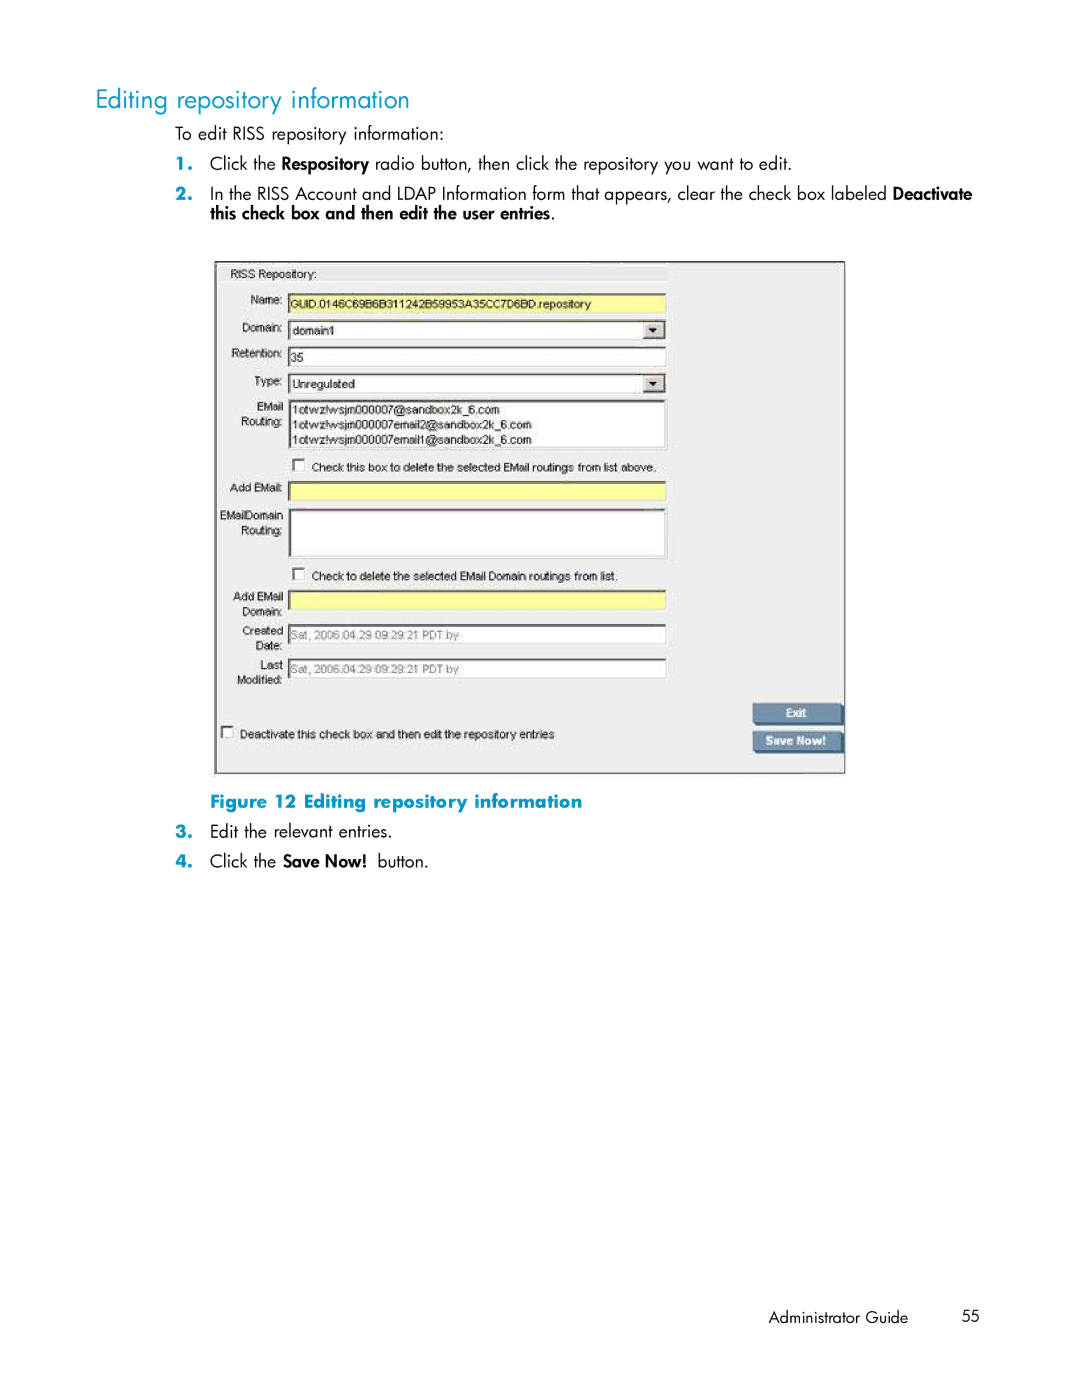 HP RISS Components manual Editing repository information, Edit the relevant entries Click the Save Now! button 